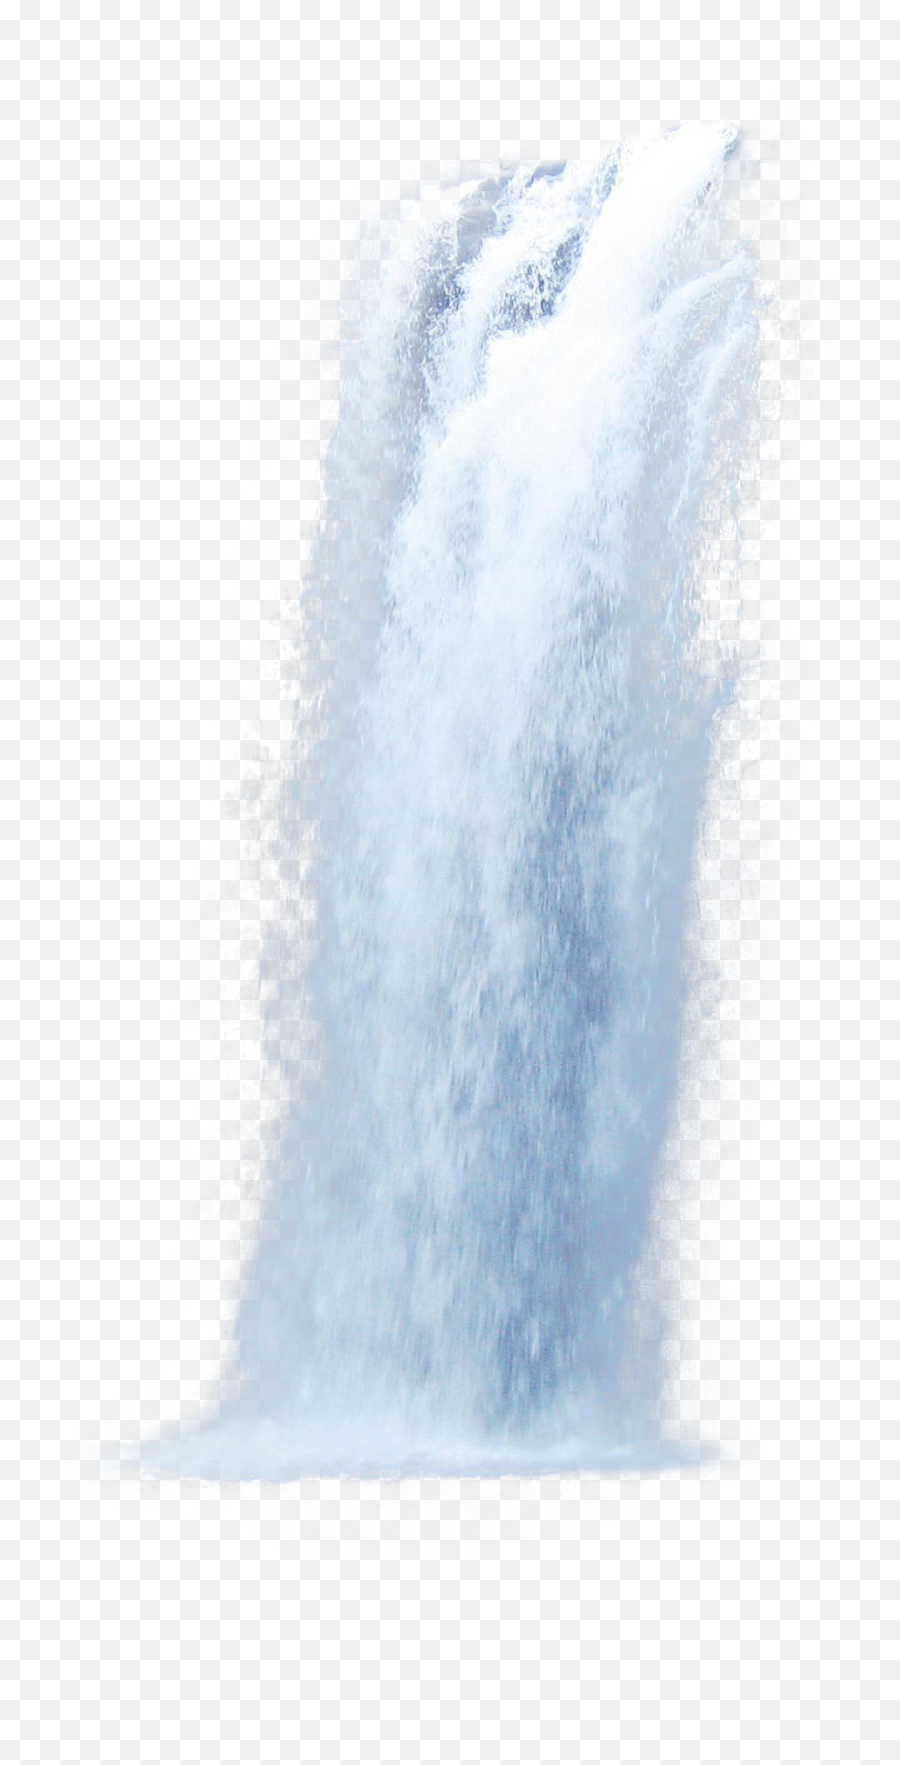 Waterfall Png Hd Transparent - Waterfall Png,Waterfall Transparent